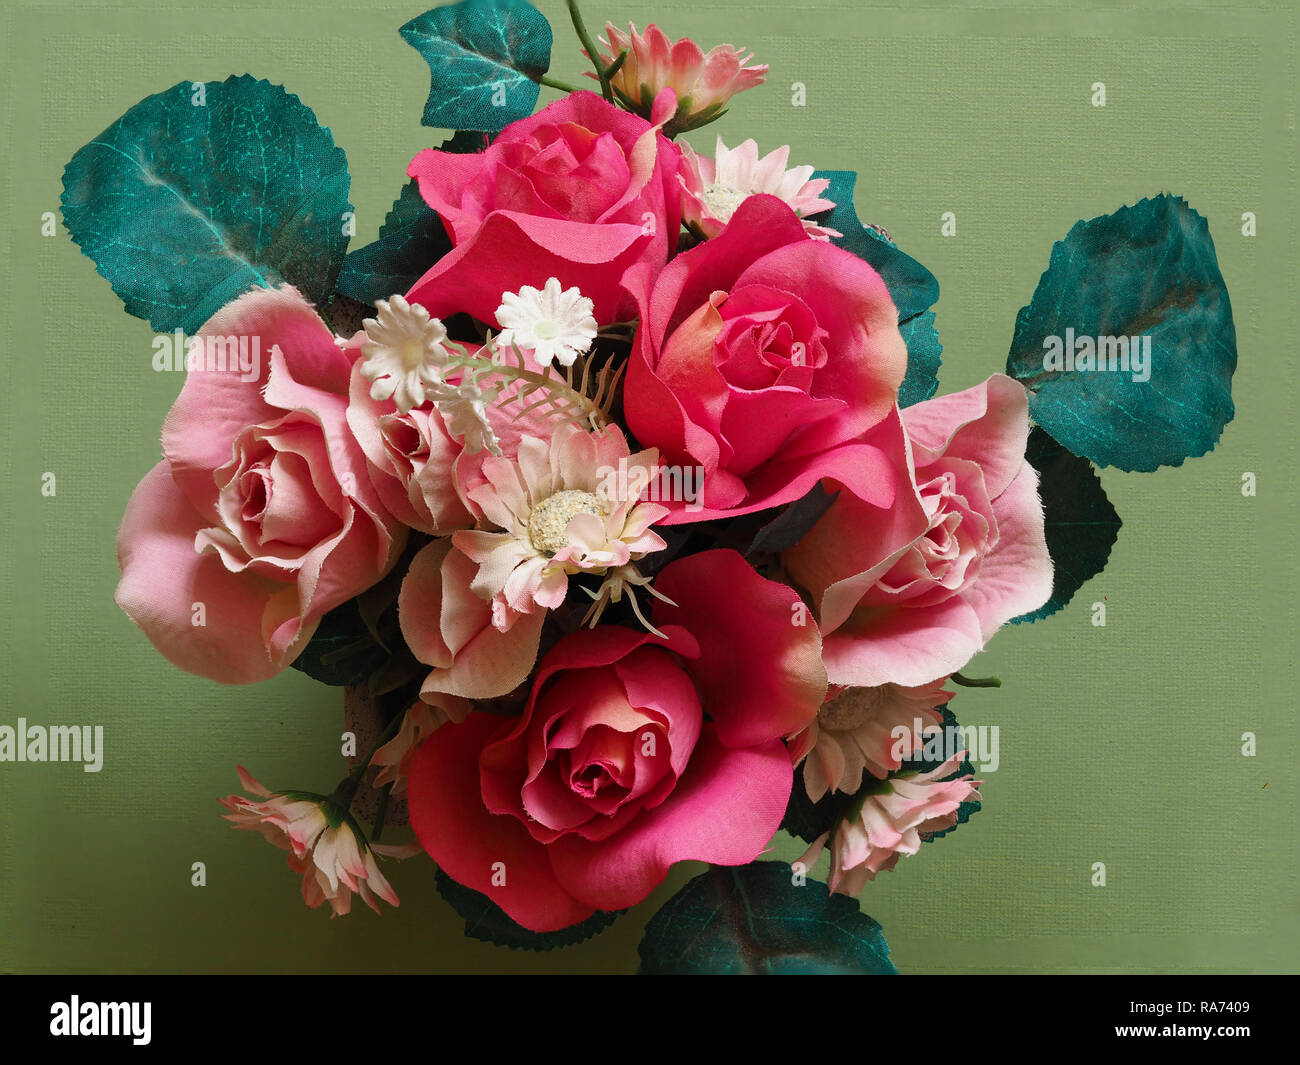 Bouquet of artificial flowers with pink roses and green leaves seen from above with a green background Stock Photo